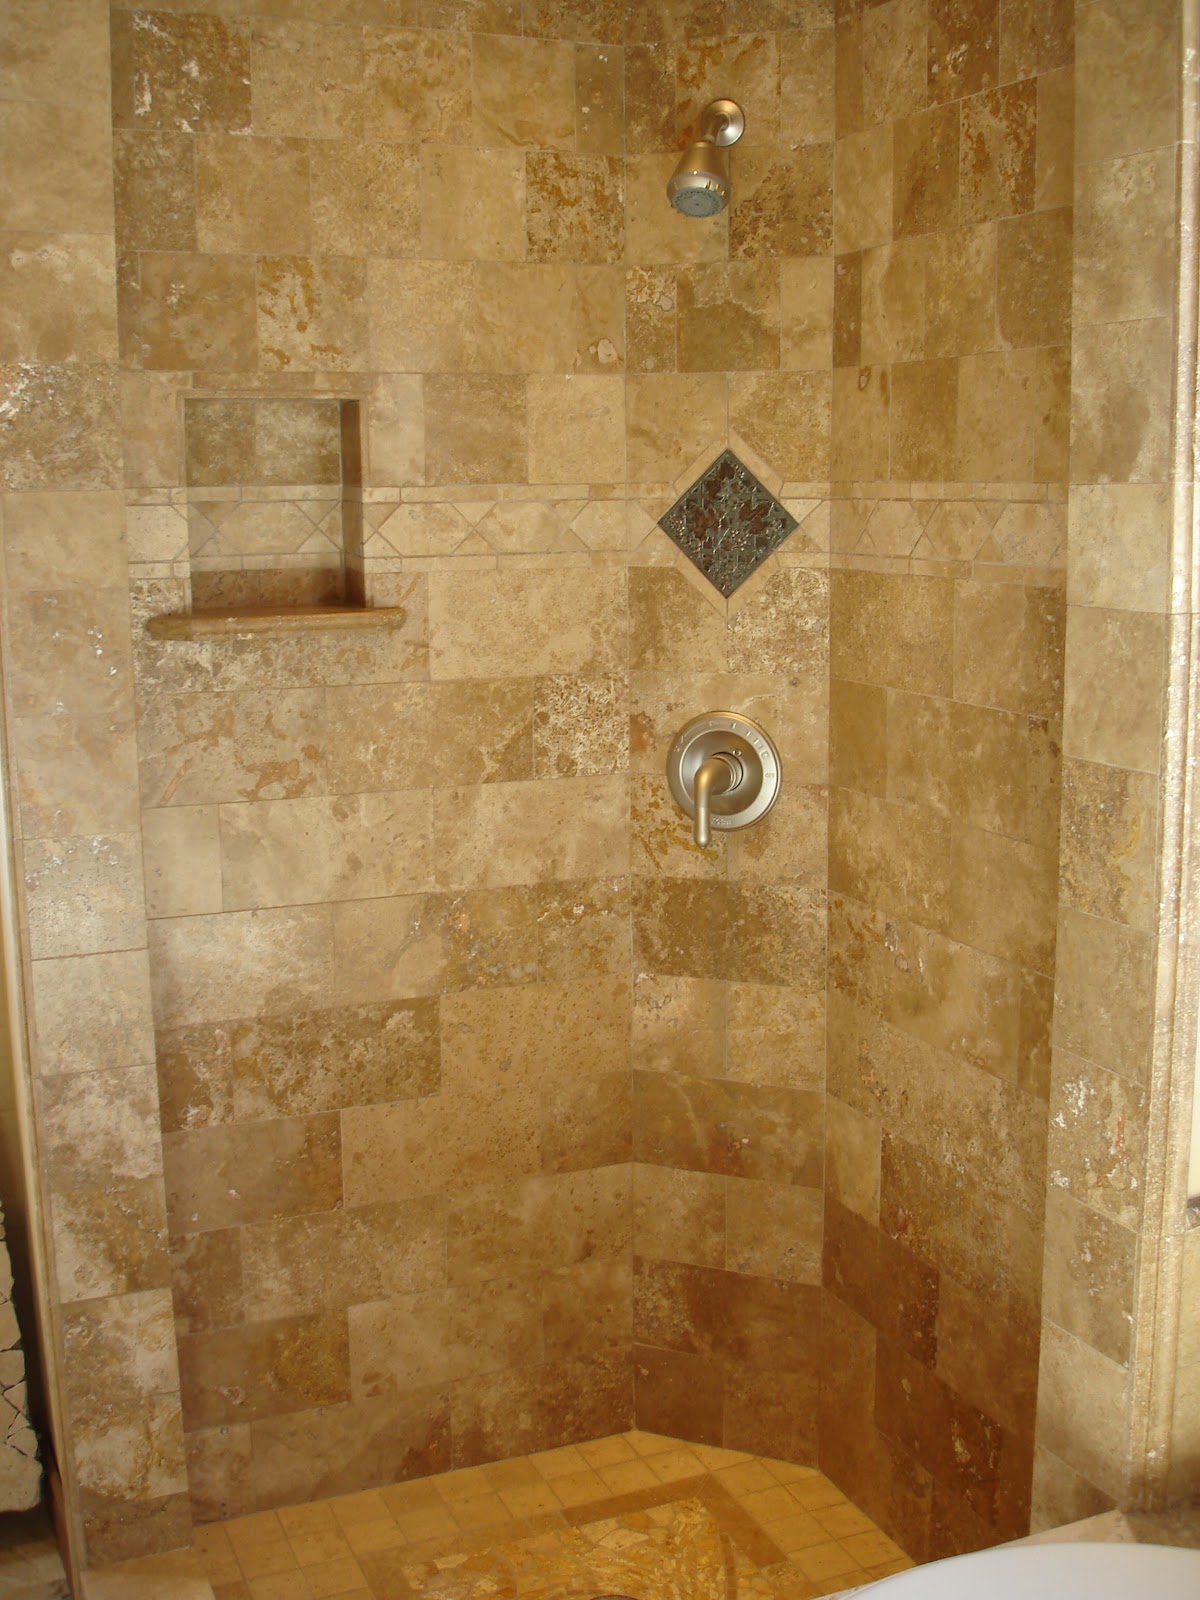 Shower Room With Small Shower Room Interior Decorated With Natural Tile Shower Designs Made From Limestone Material Finished In Traditional Touch Bathroom Tile Shower Designs In Marble And Granite Types Represent The Best Natural Textures